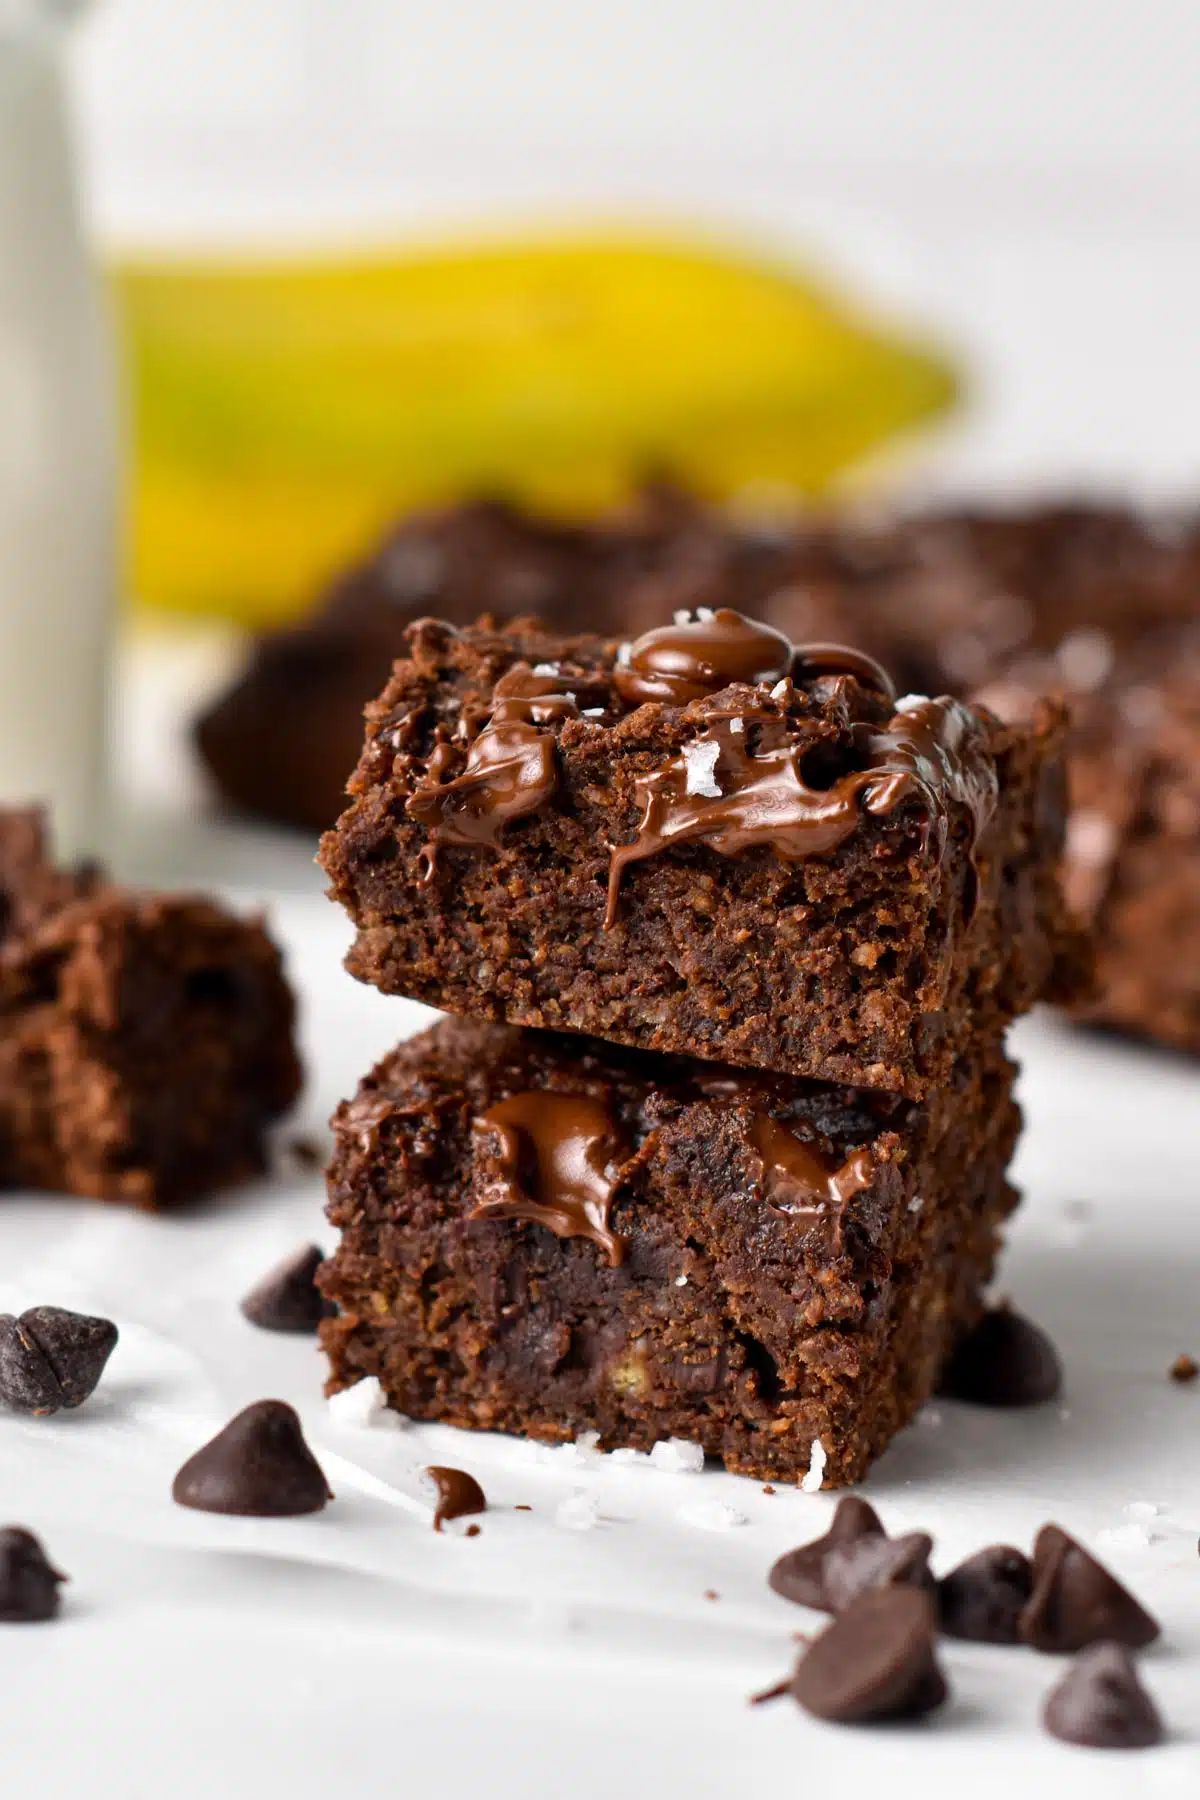 These Healthy Banana Brownies are  the most delicious fudgy brownies made with wholesome ingredients. Plus, they are naturally vegan, dairy-free and nut-free so you can share with all your family and friends.